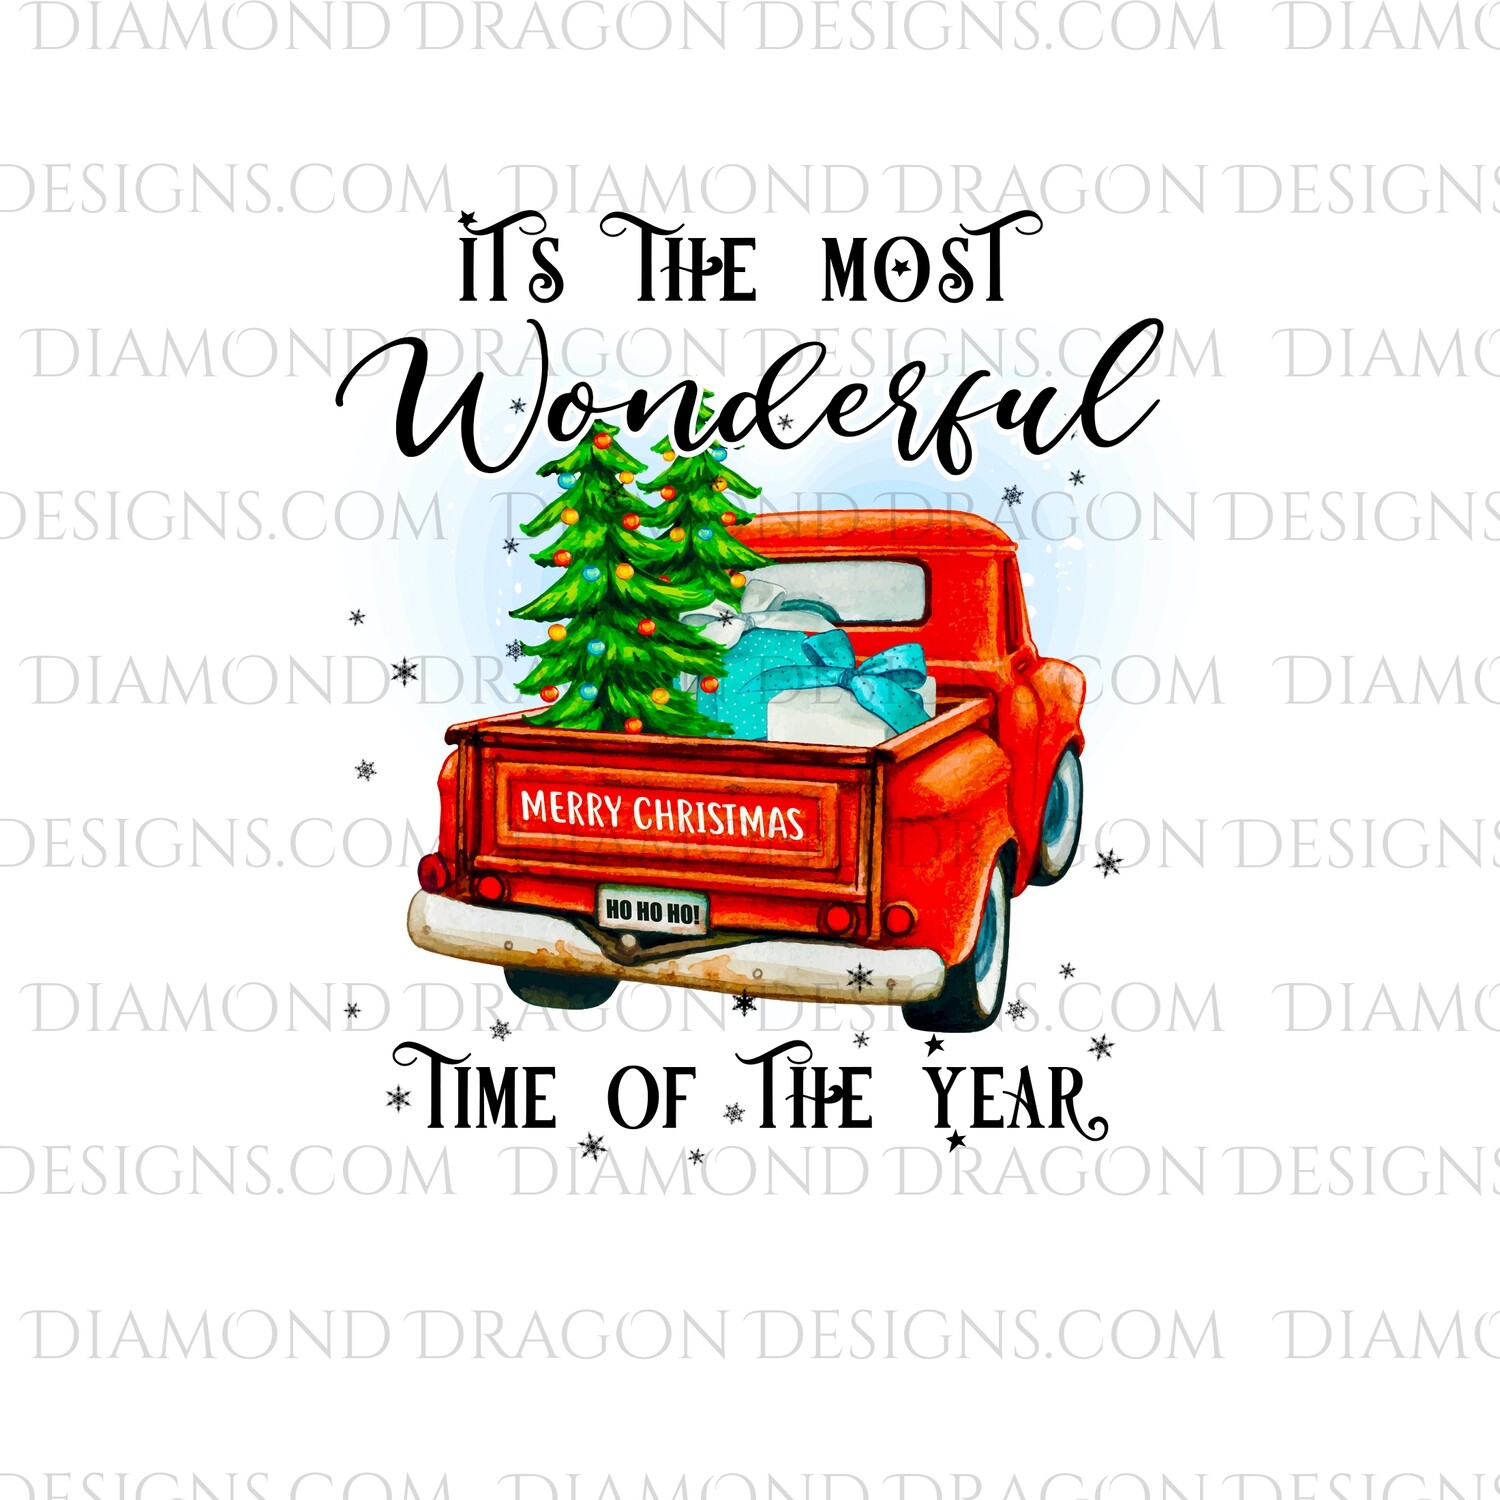 Christmas - Red Truck, Christmas Tree, It’s the most wonderful time, Red Vintage Truck 8, Waterslide